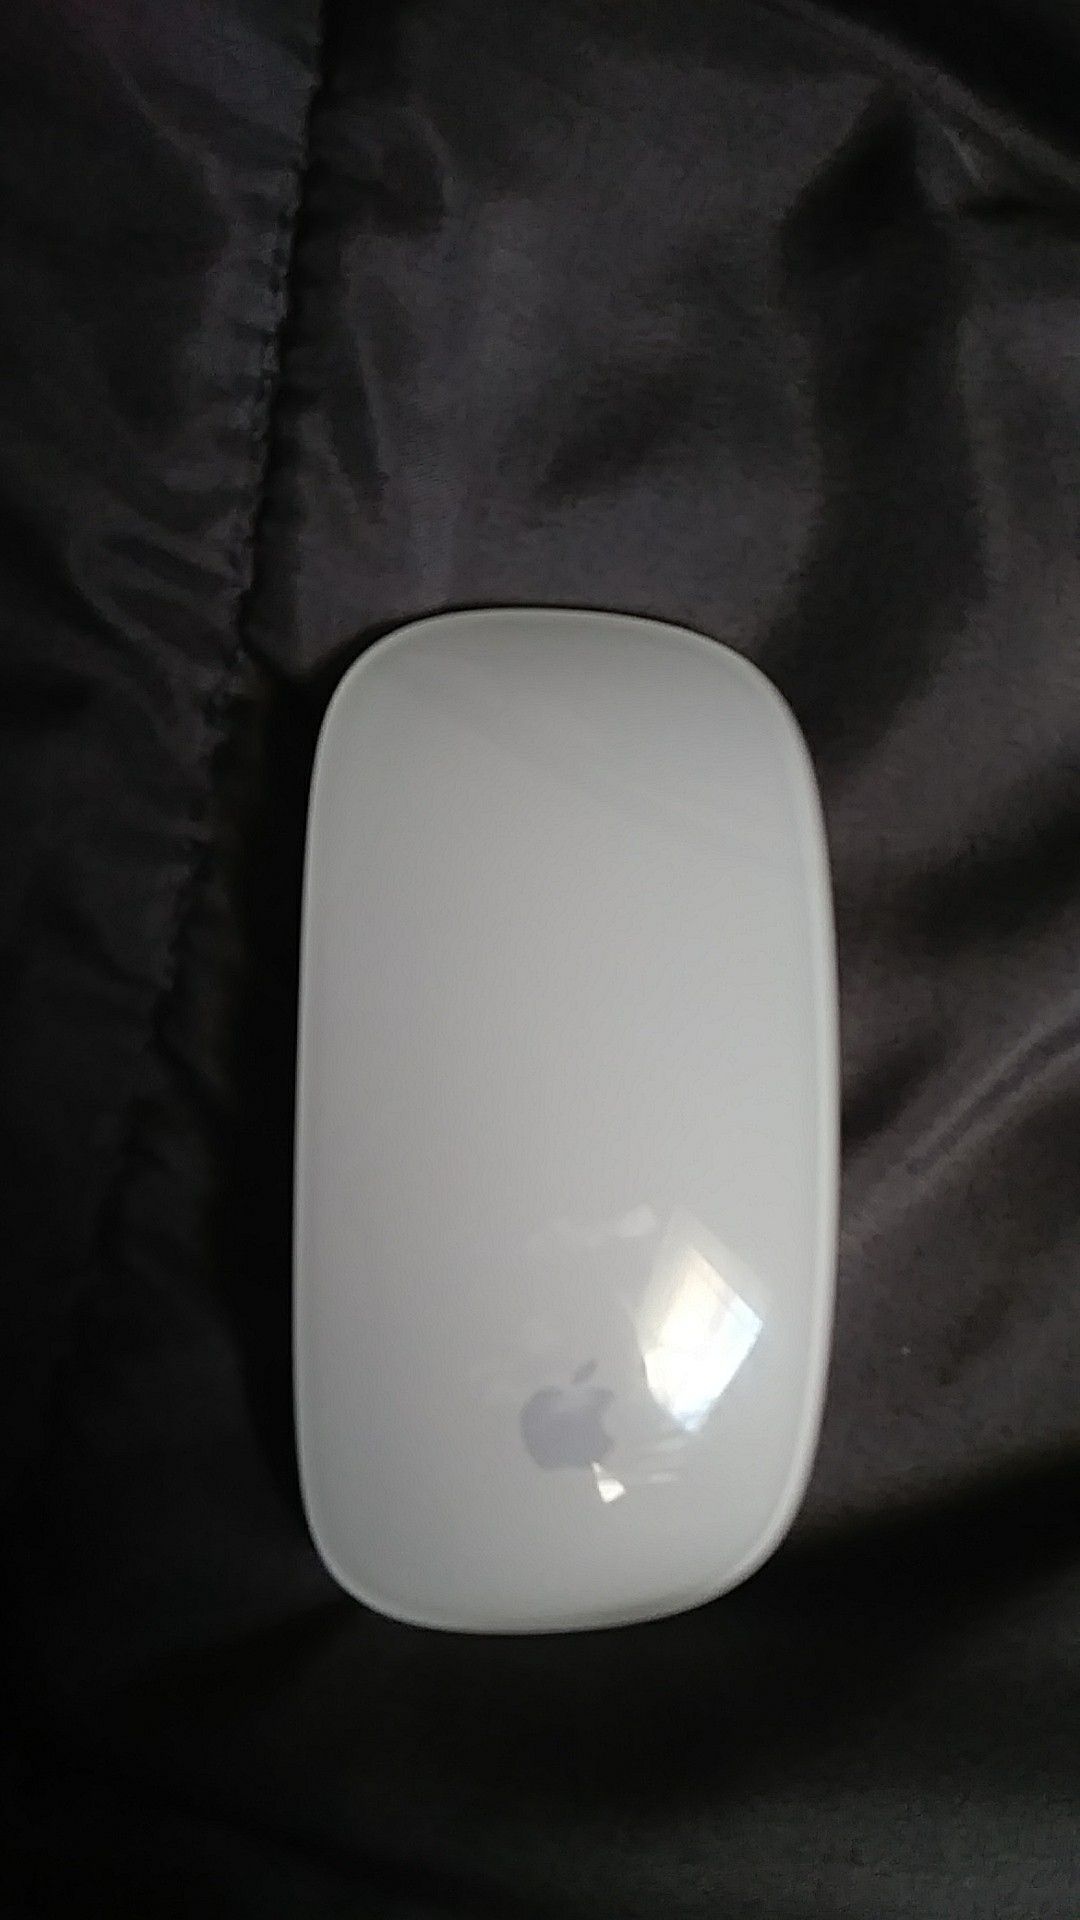 Apple Brand Mighty Mouse 2 Brand New $25